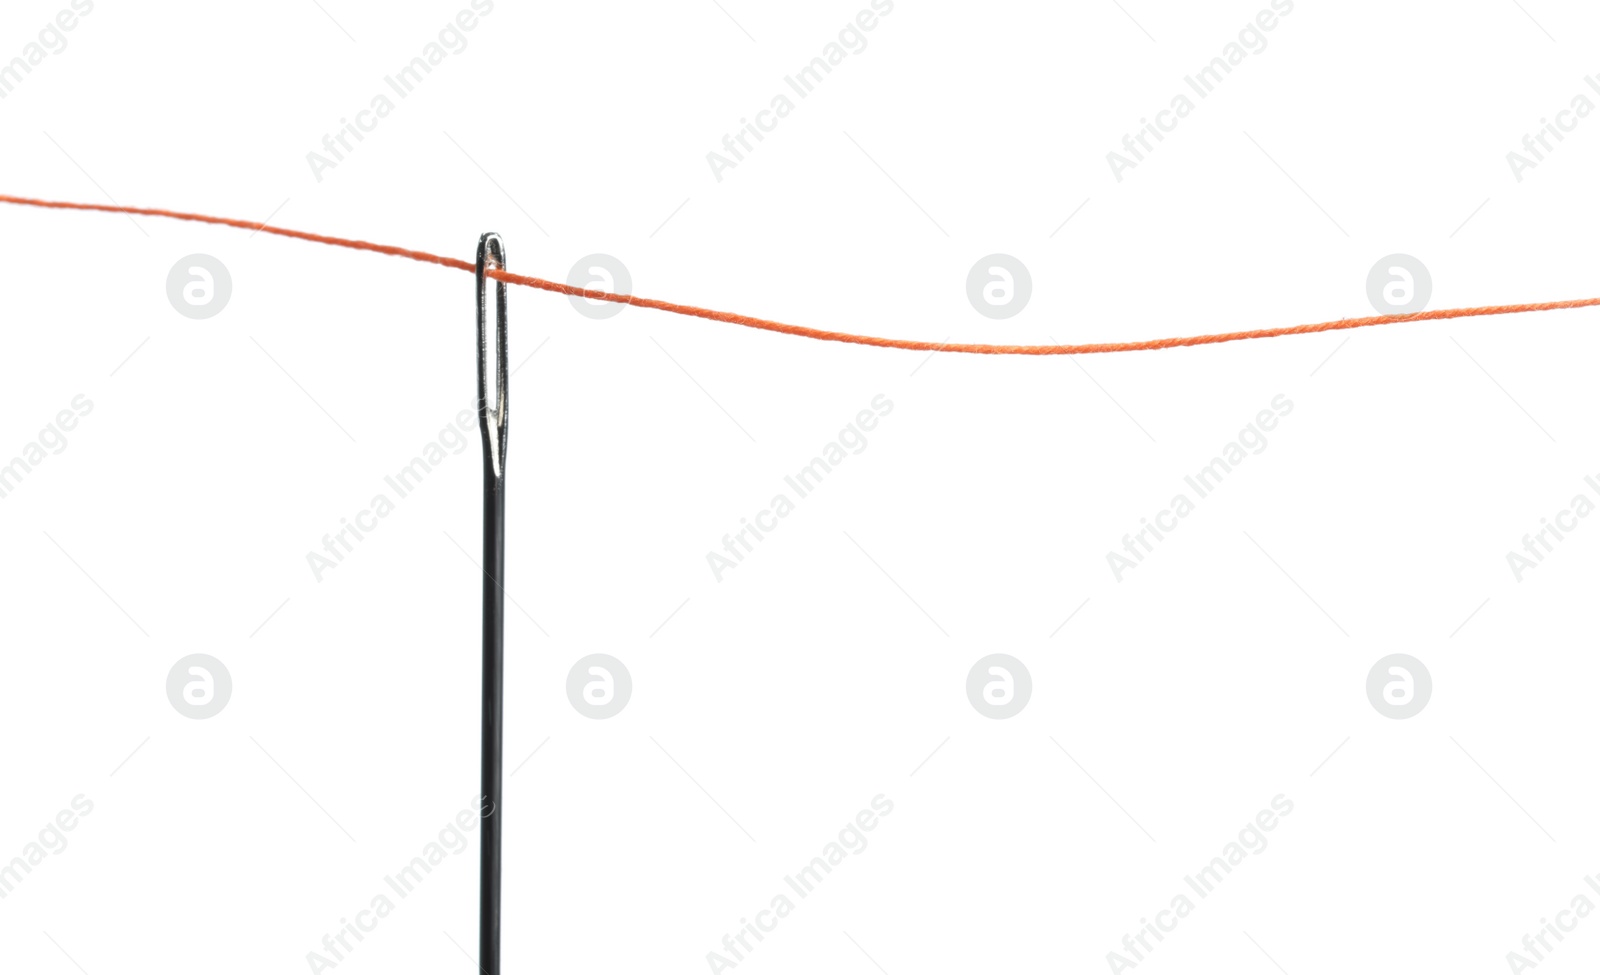 Photo of Sewing needle with red thread isolated on white